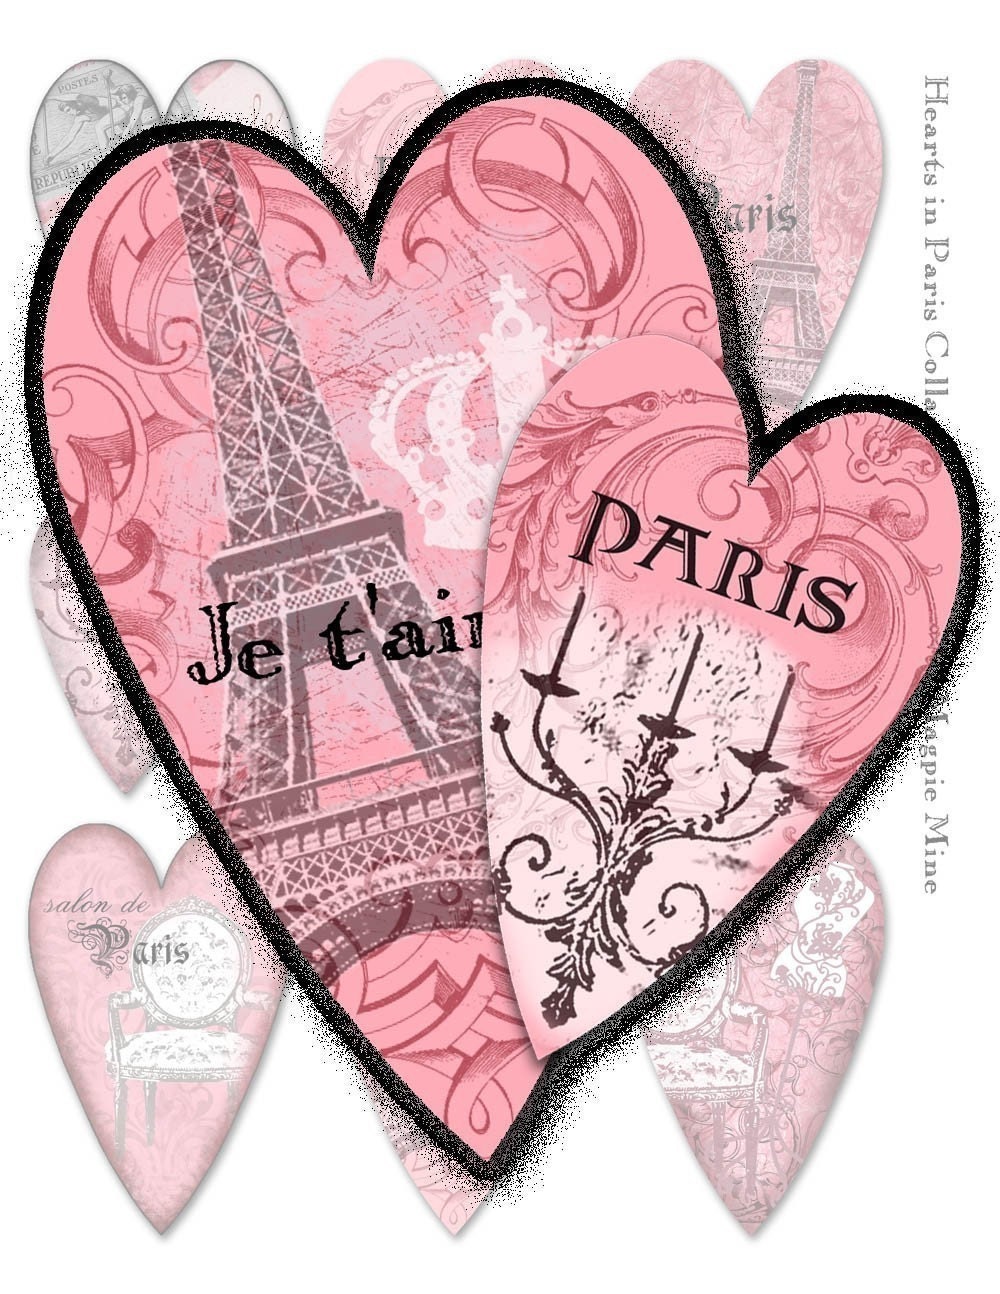 Paris Hearts Collage Sheet - Perfect for Valentines - Digital Download - Pink Black and White Shabby Chic